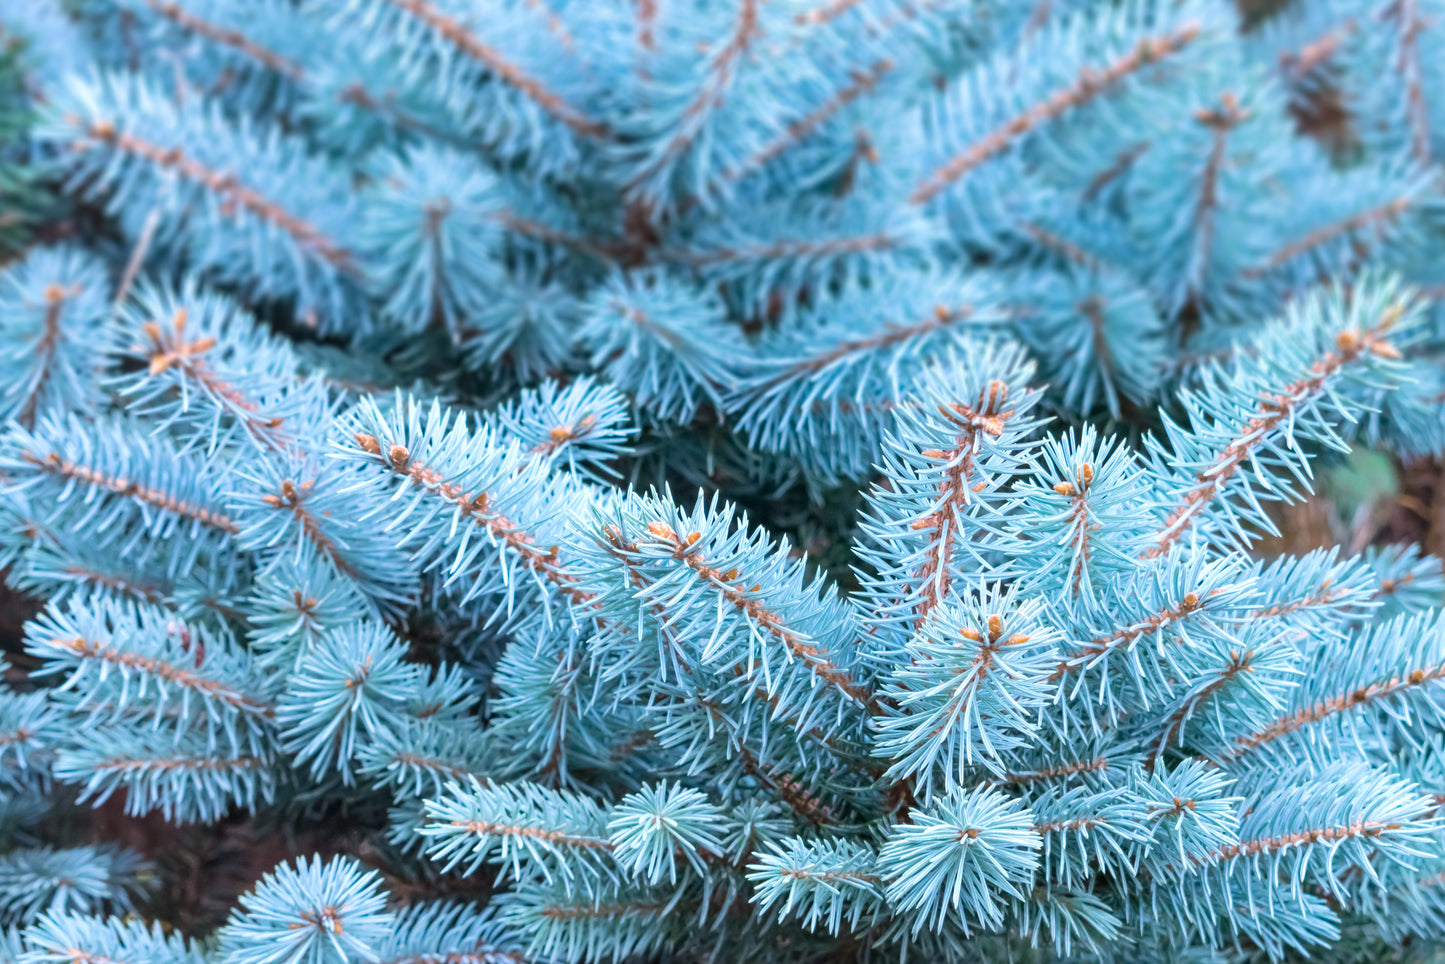 50 Colorado BLUE SPRUCE Tree Picea Pungens Glauca Christmas Tree White Silver Spruce Evergreen Seeds